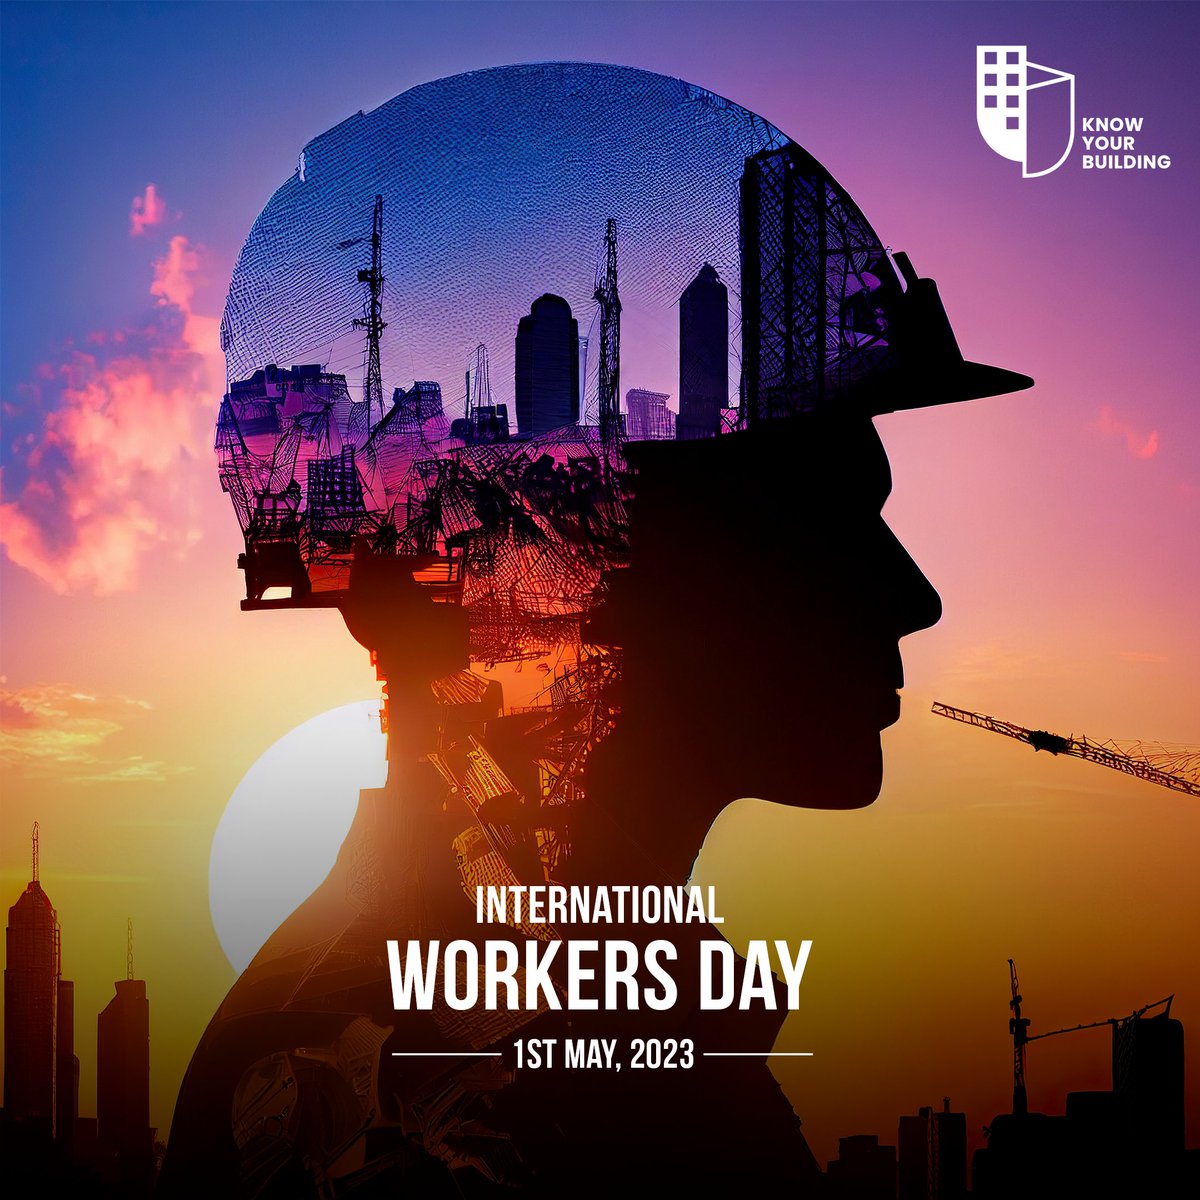 Wishing everyone a Happy International Worker's Day! We are committed to providing a safe and comfortable workplace for all employees. 

#KnowYourBuilding #InternationalWorkersDay #LabourDay #WorkerRights #Diversity #Inclusivity #Wirelessbms #Wirelessbuildingmanagementsystem